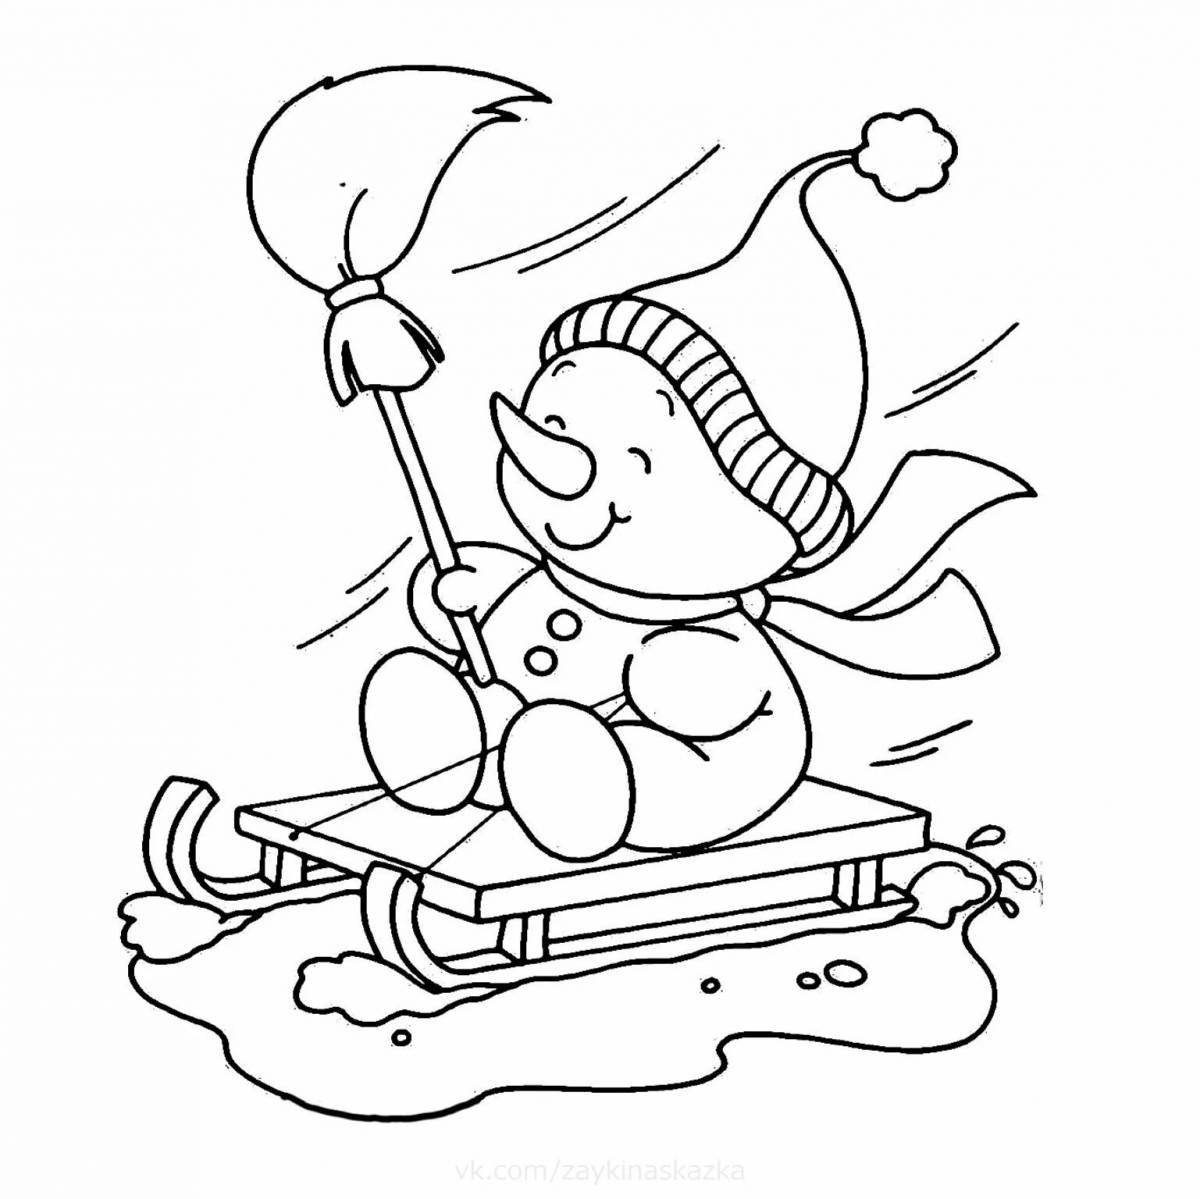 Coloring page happy snowman on skis